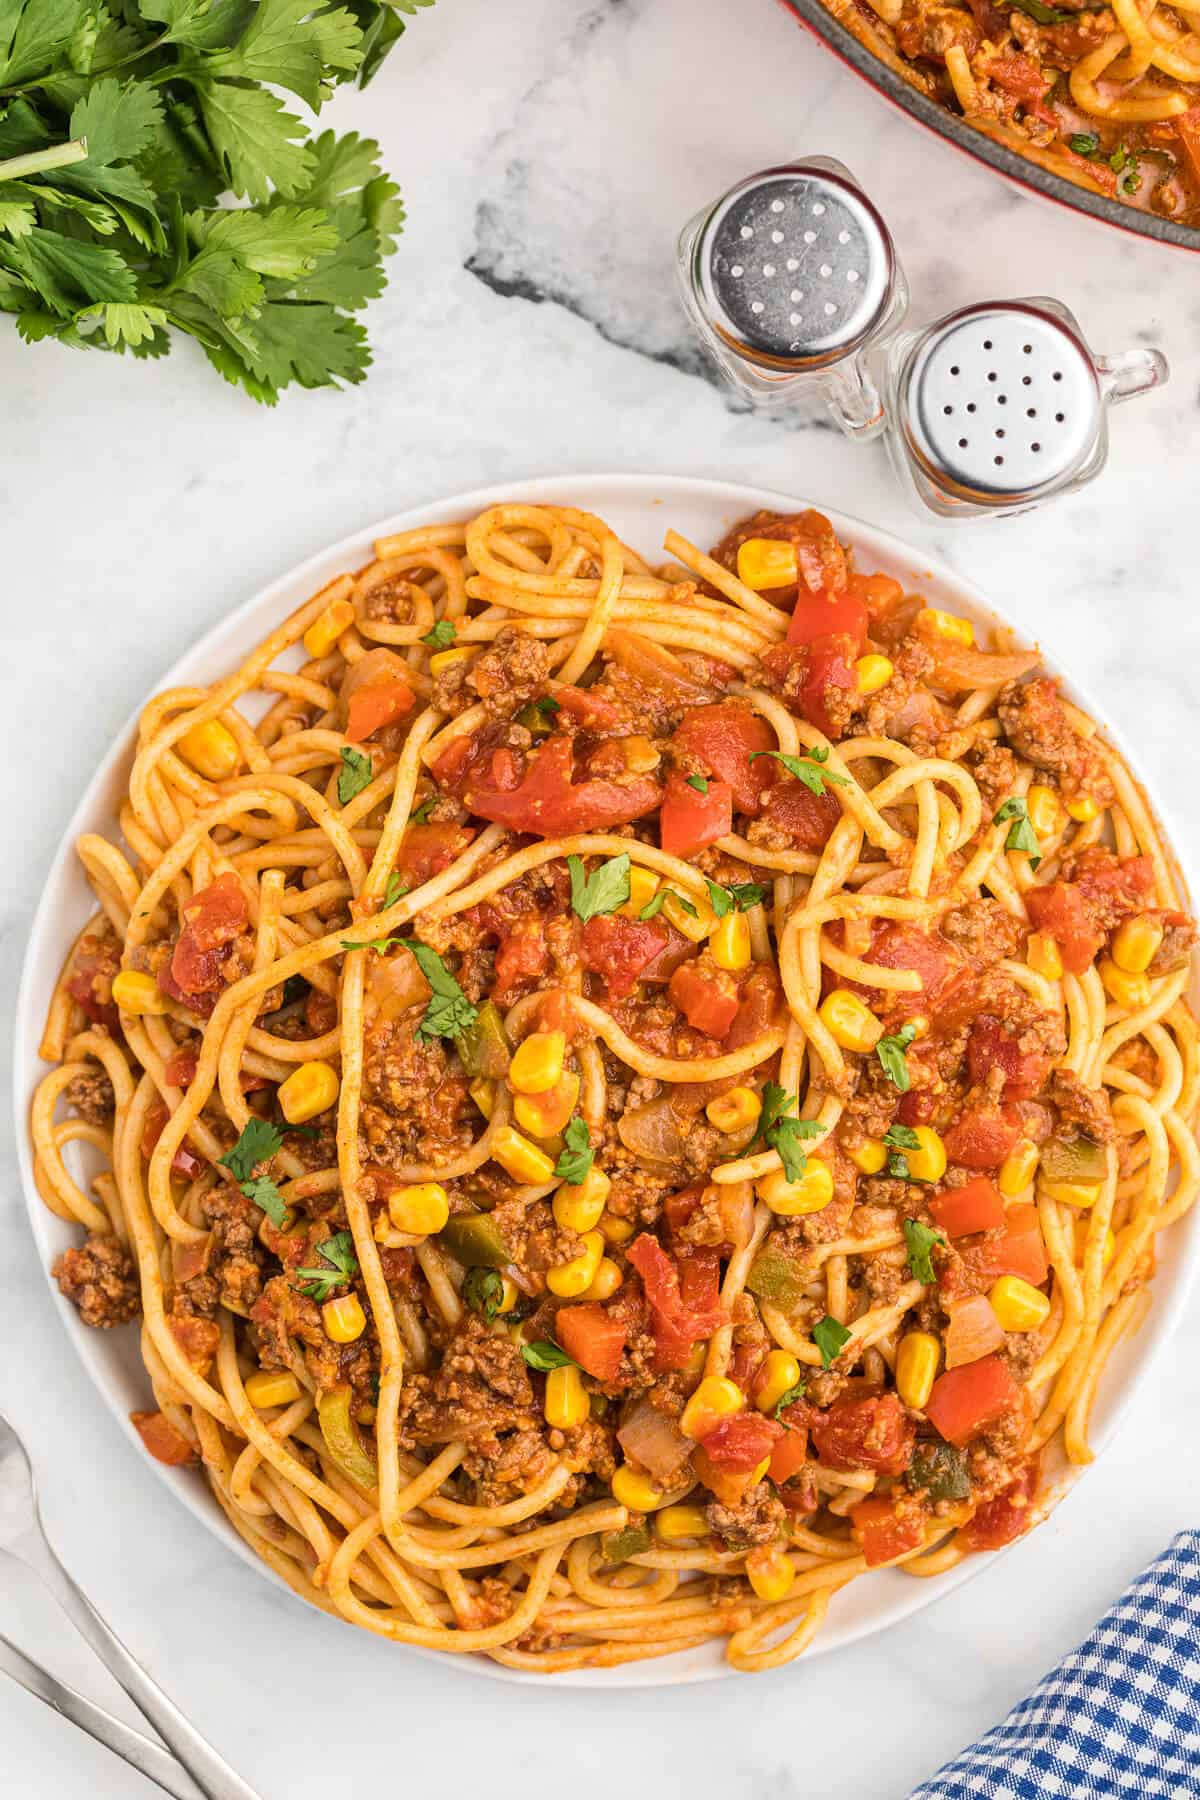 Mexican Spaghetti Recipe - This easy taco pasta recipe is filled with cheesy ground beef, taco seasoning, peppers, corn, tomatoes and noodles. It's simple to make with just the right amount of spice. The perfect family dinner recipe.